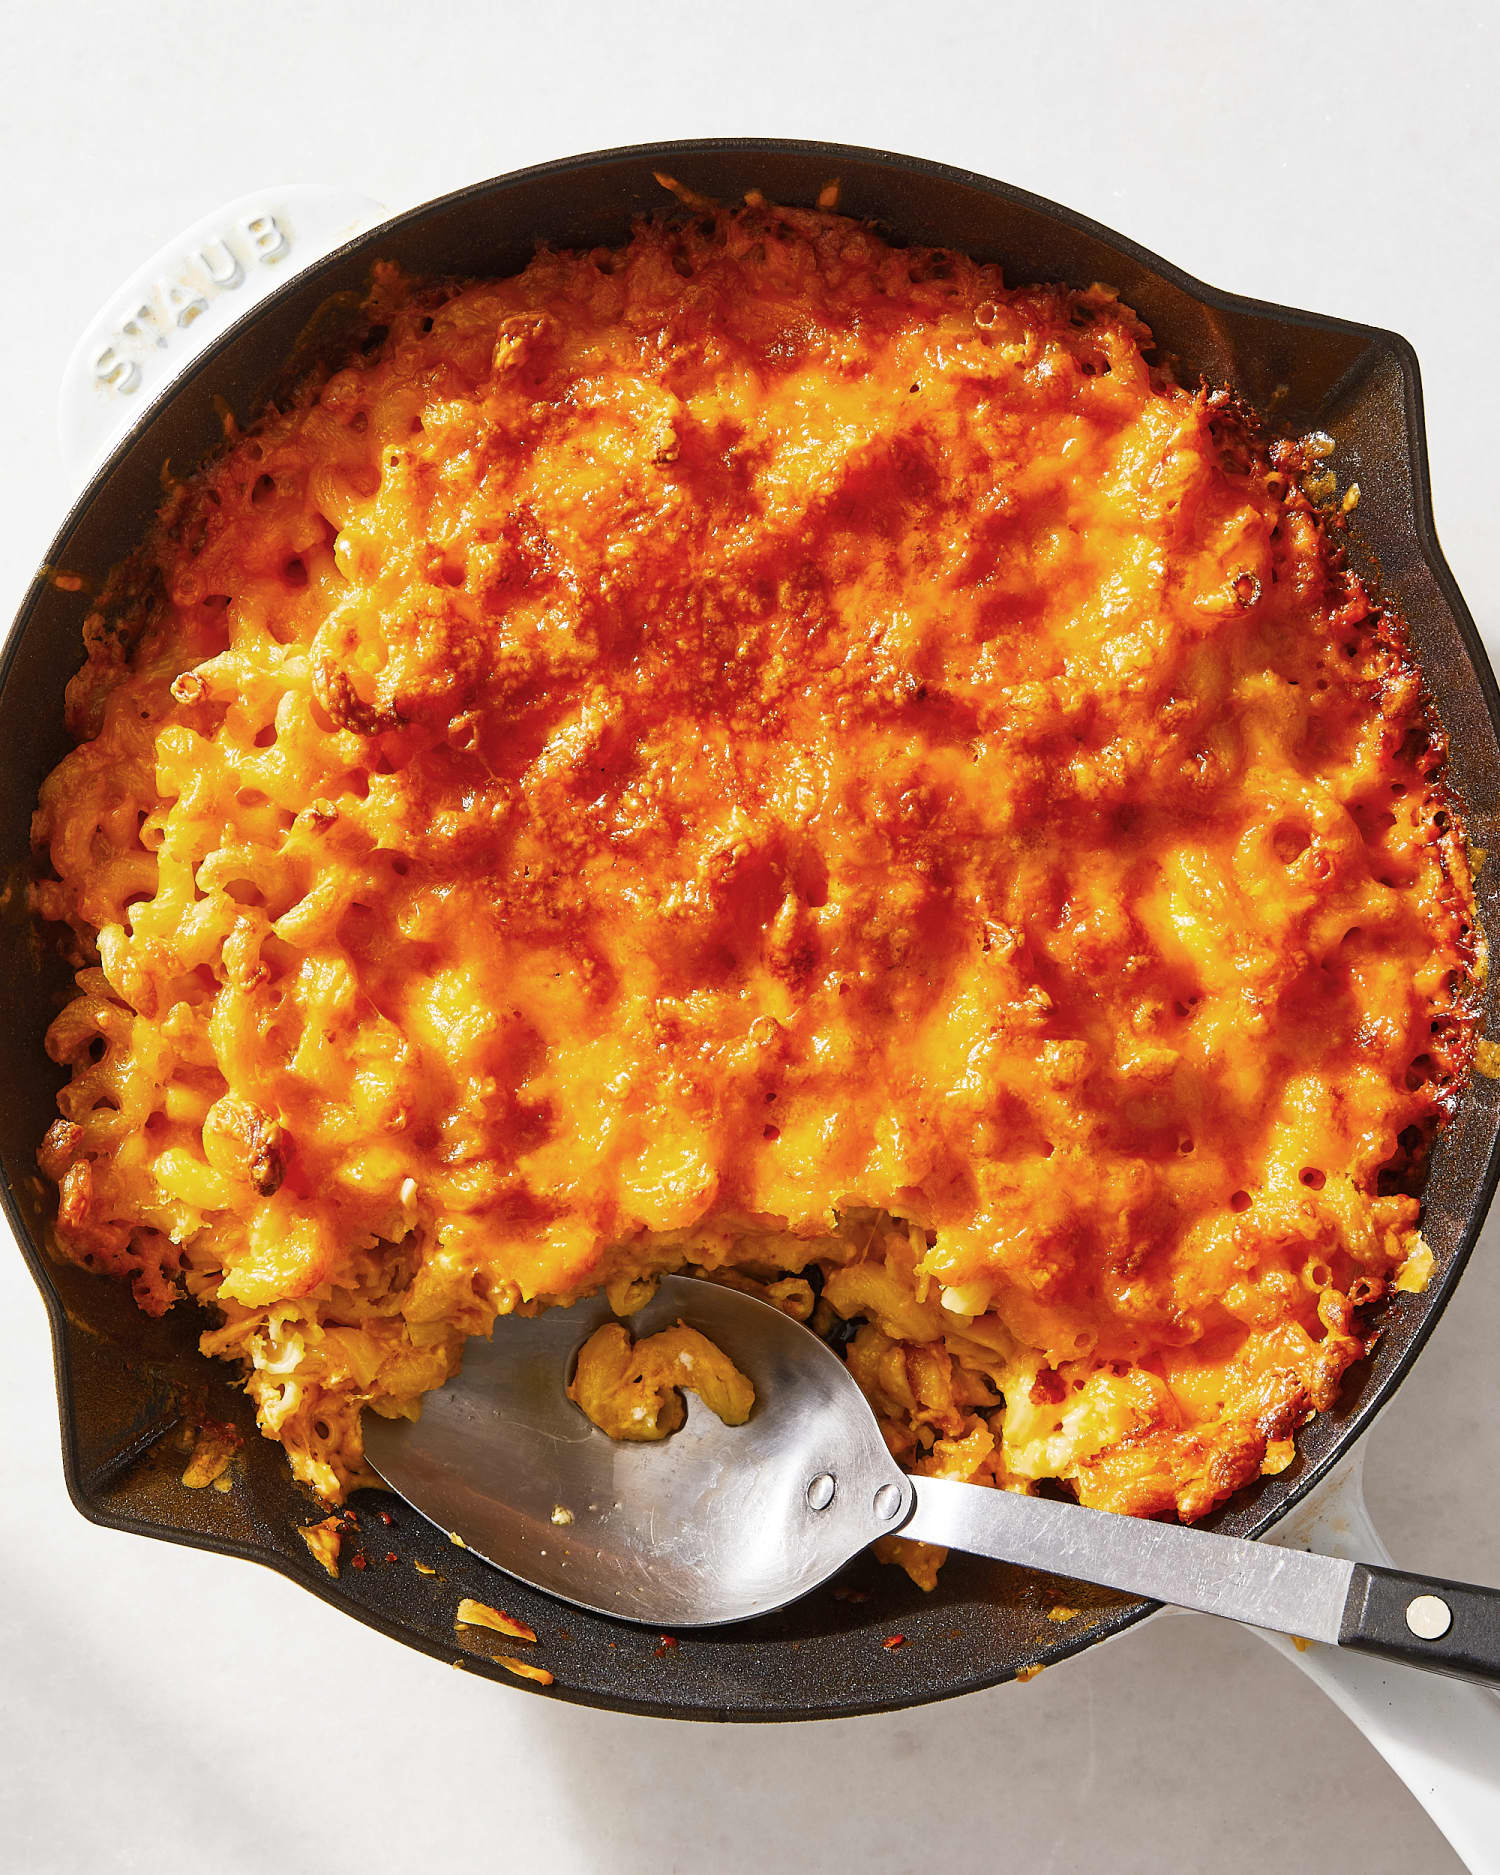 This Baked Mac & Cheese Has the Best Cheesy, Crunchy Crust